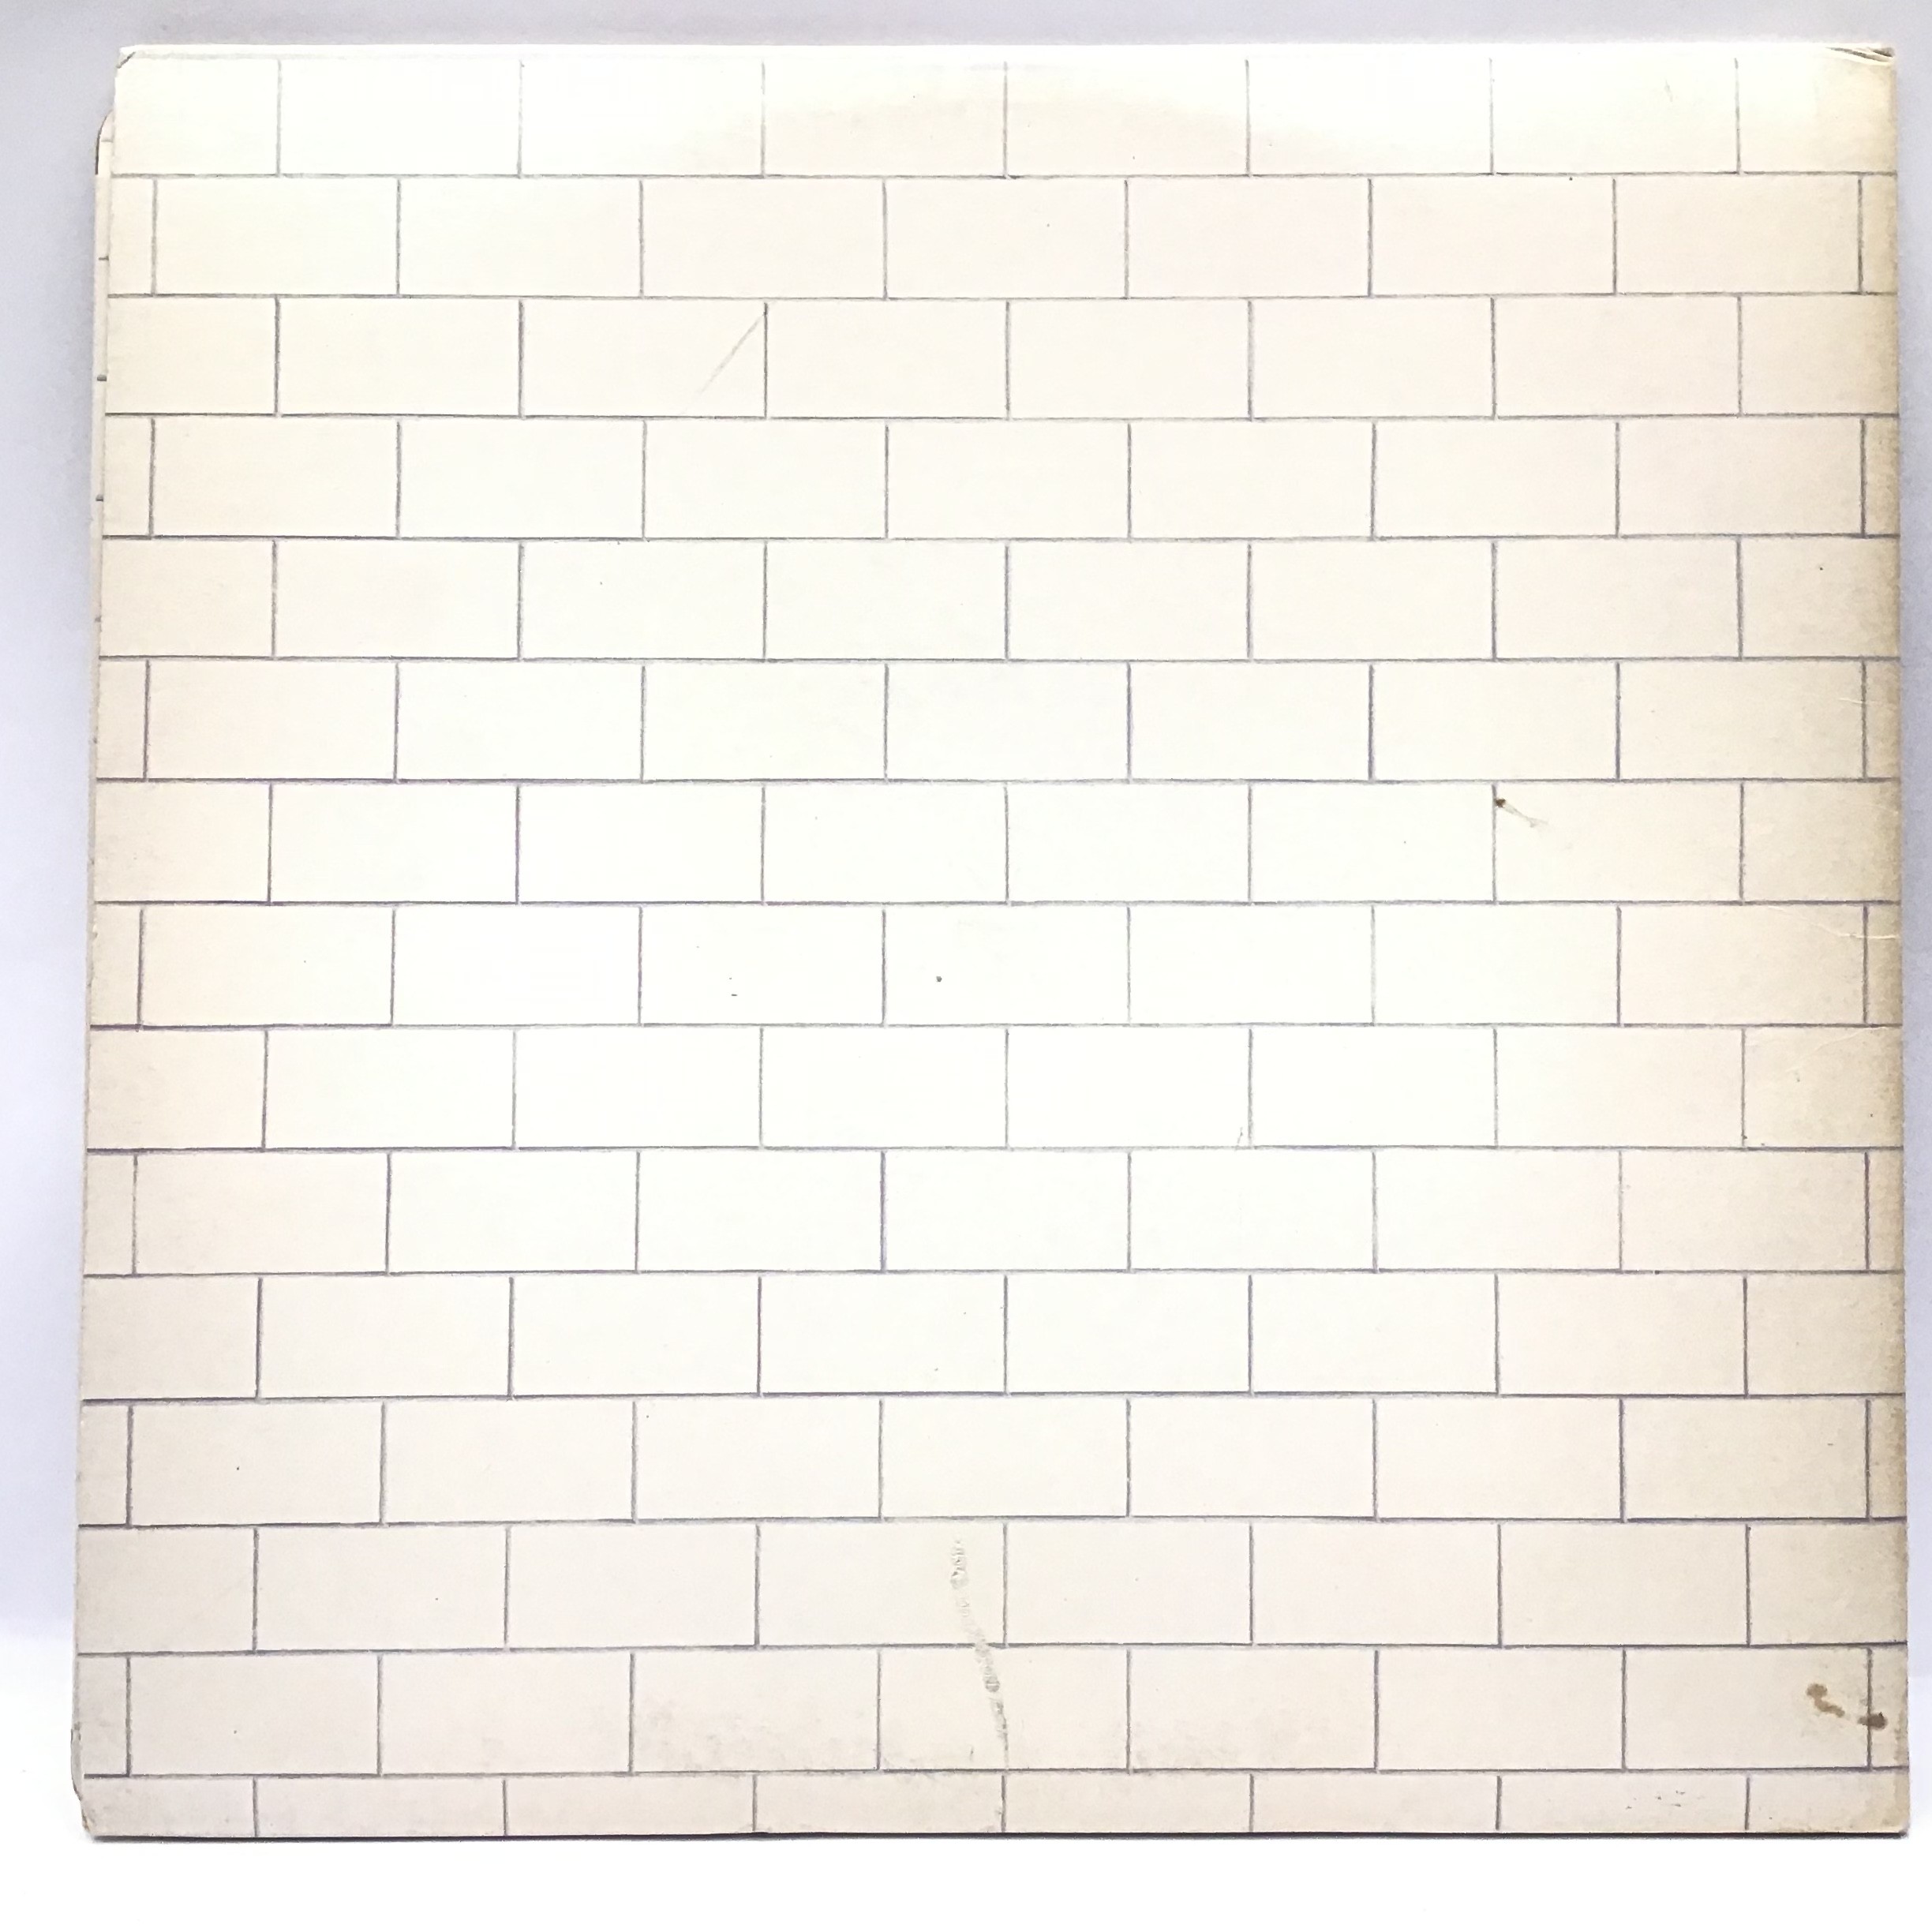 PINK FLOYD 'THE WALL' UK STEREO VINYL DOUBLE ALBUM. Great record here on Harvest SHDW411 released in - Image 2 of 3